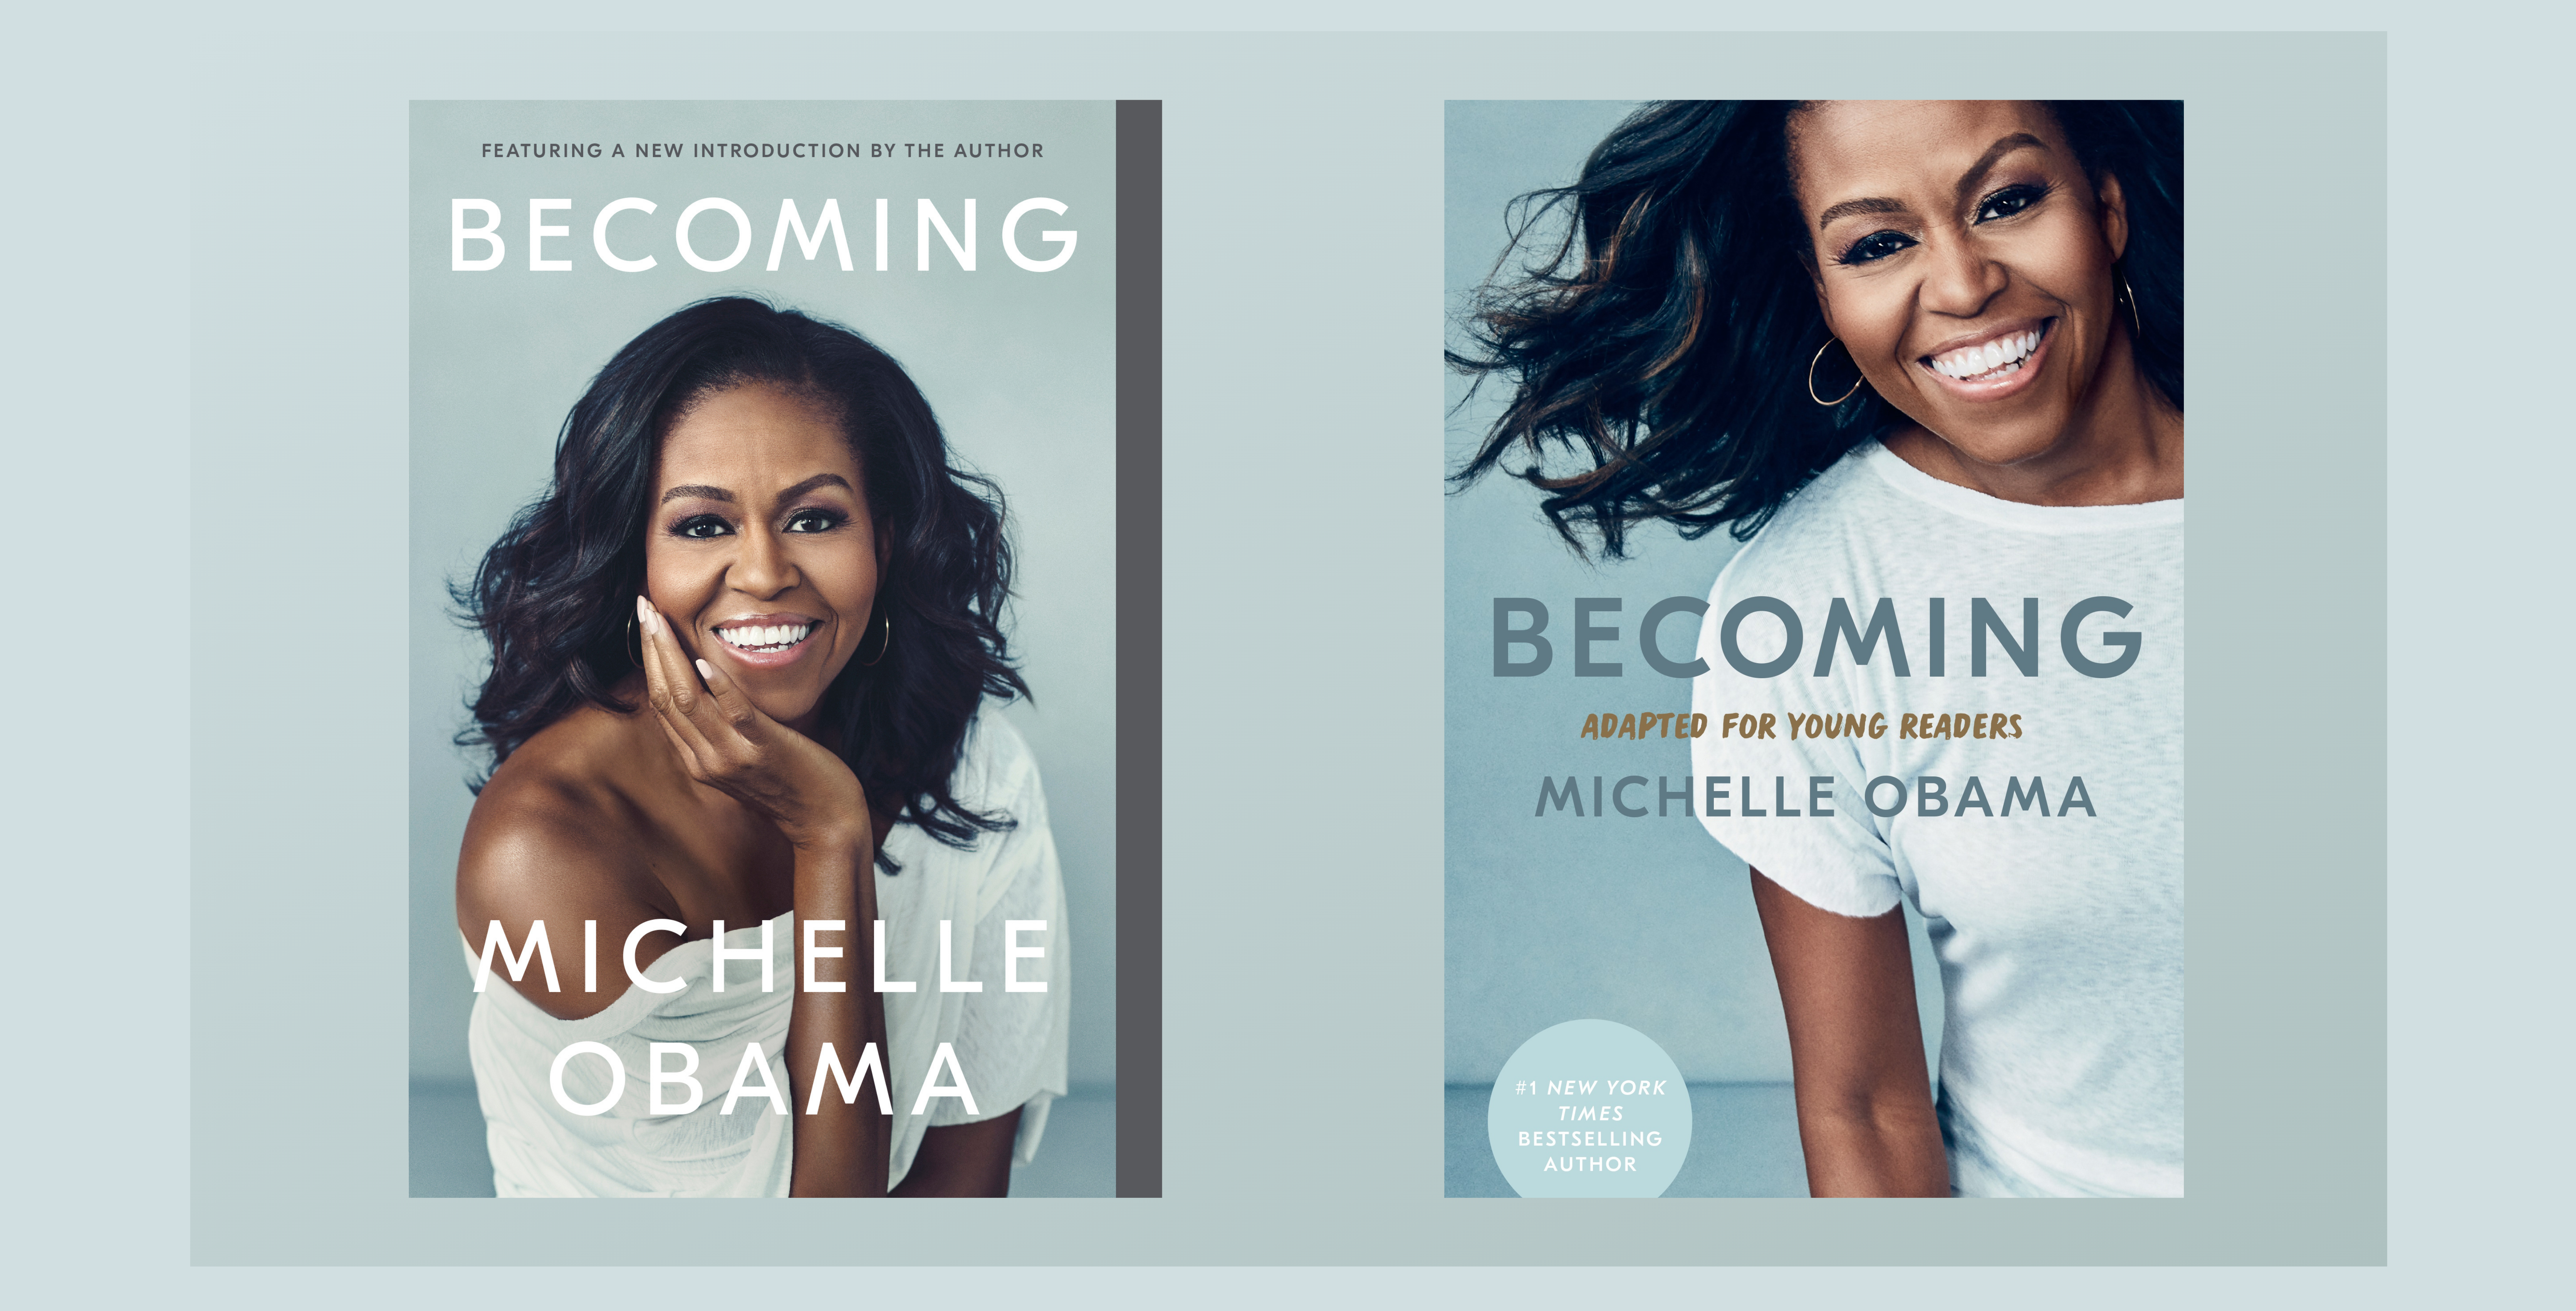 BECOMING by Michelle Obama: Coming in Paperback and Young Readers Edition!